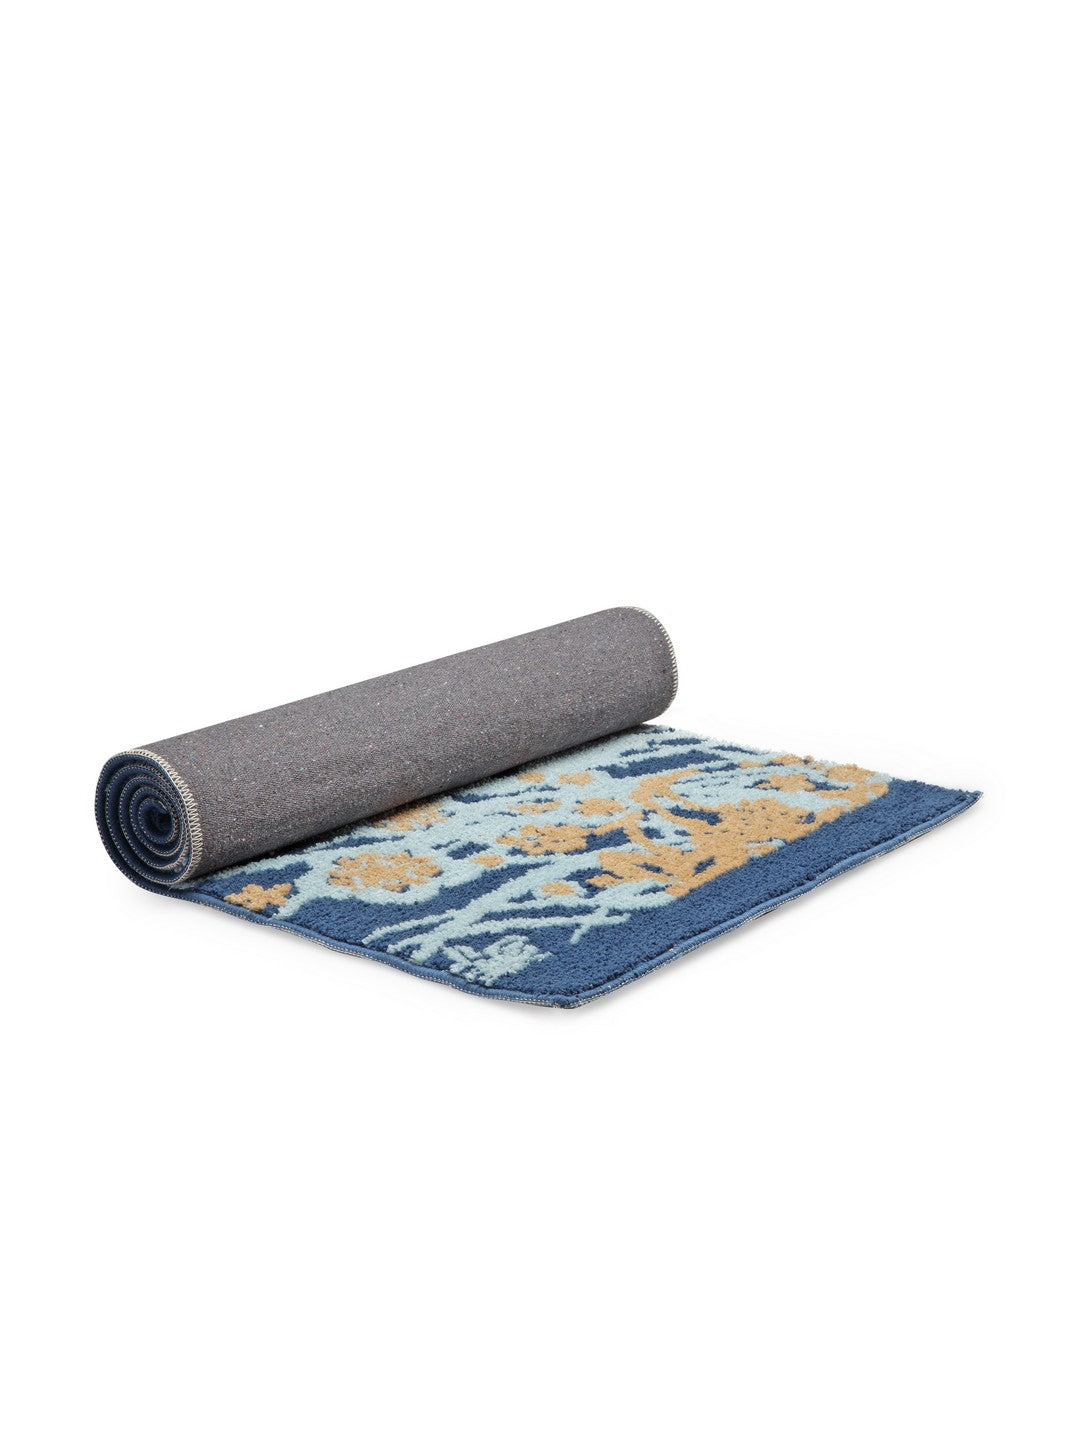 Blue 22 inch x 55 inch Floral Patterned Bed Runner